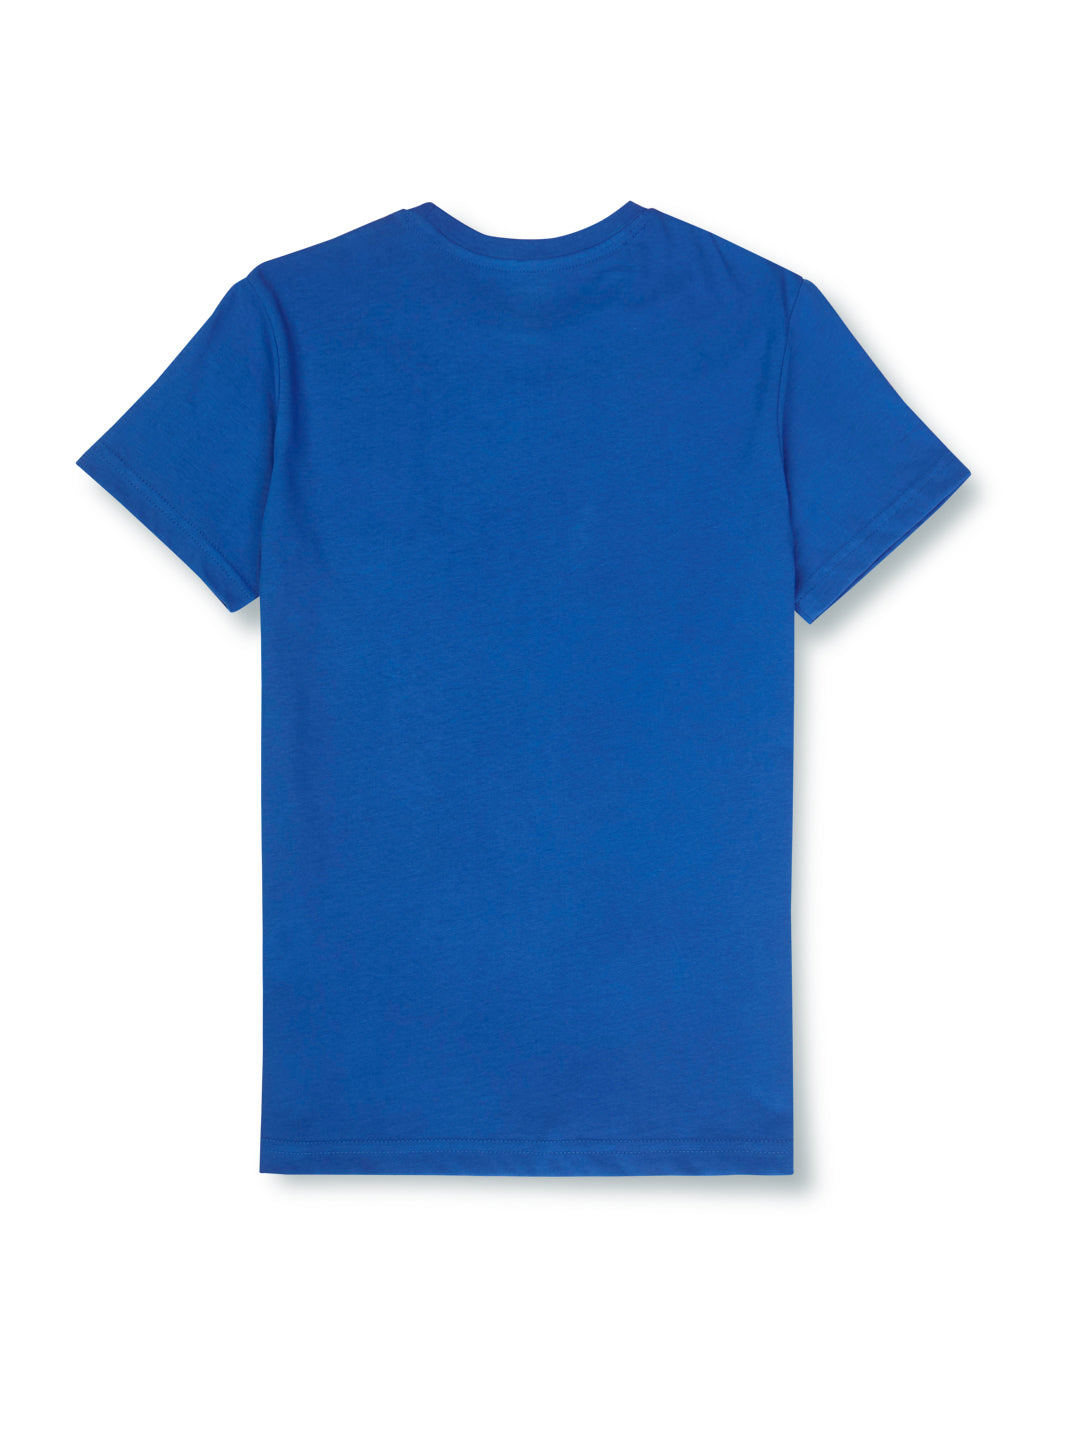 Boys Blue Round Neck Knitted Cotton Printed T-Shirt